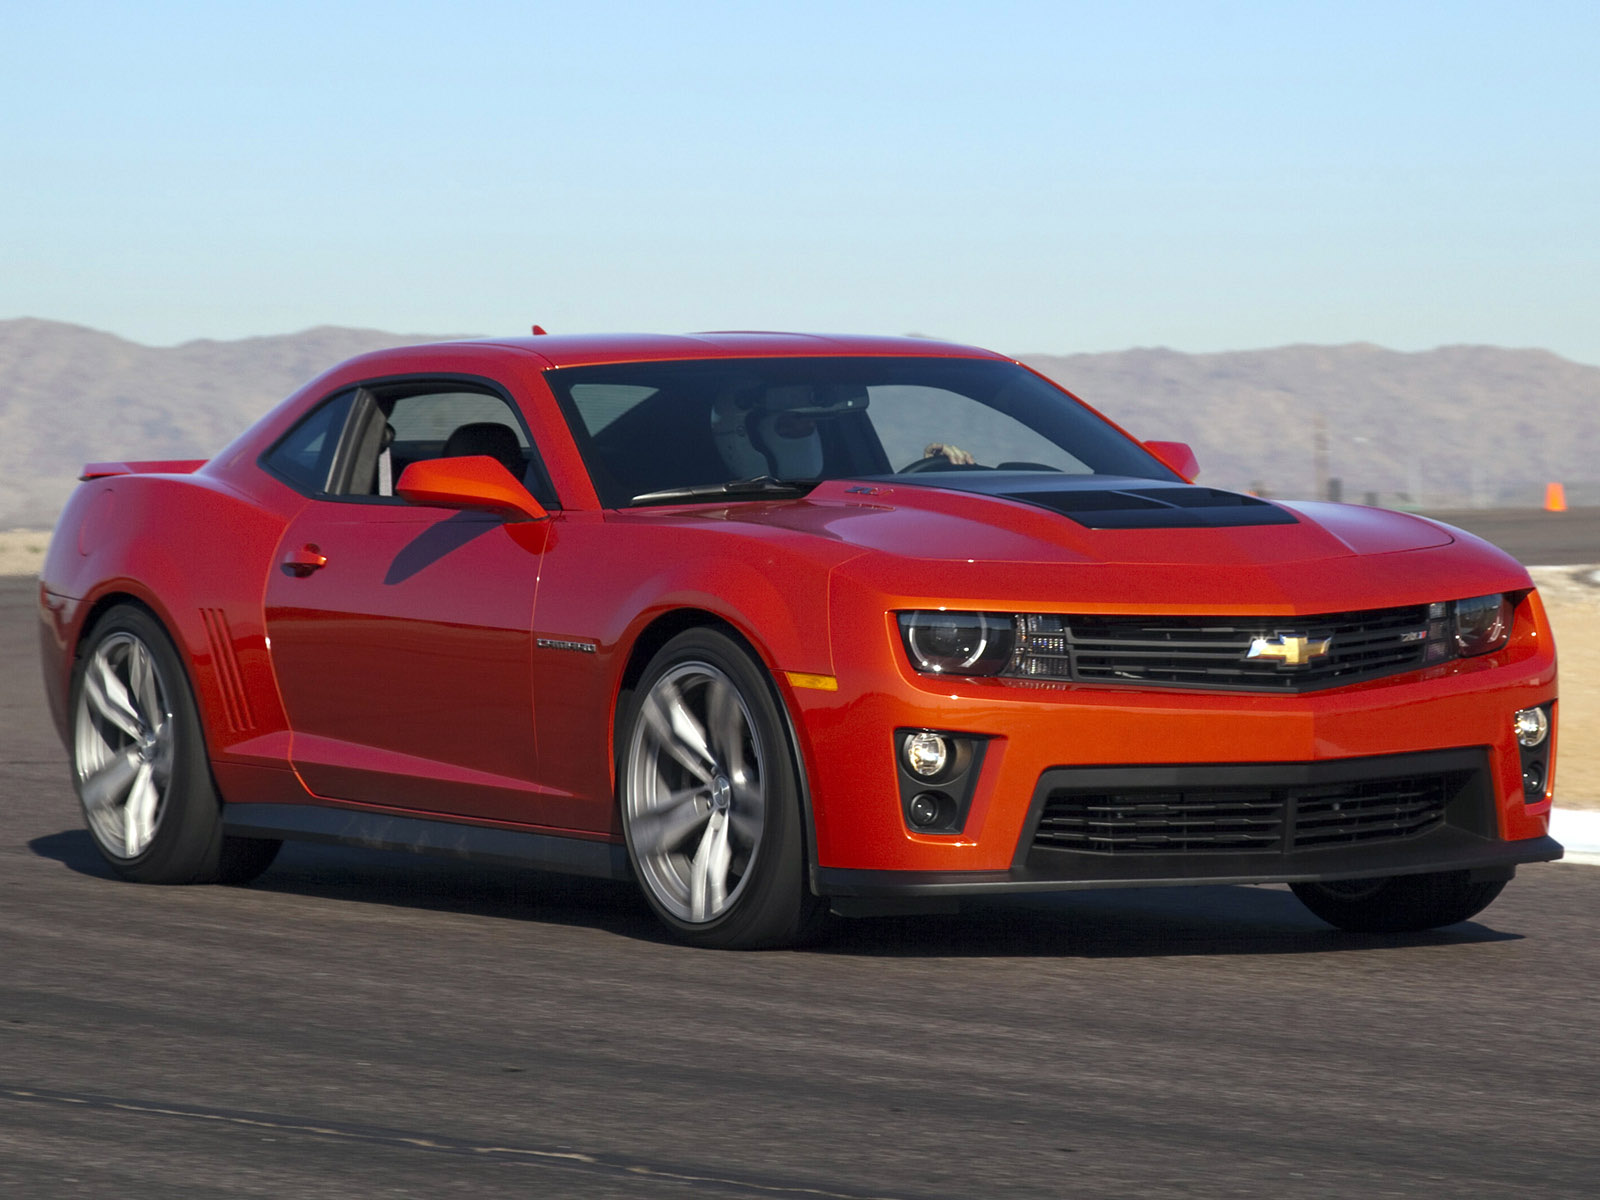 Car in pictures car photo gallery » Chevrolet Camaro ZL1